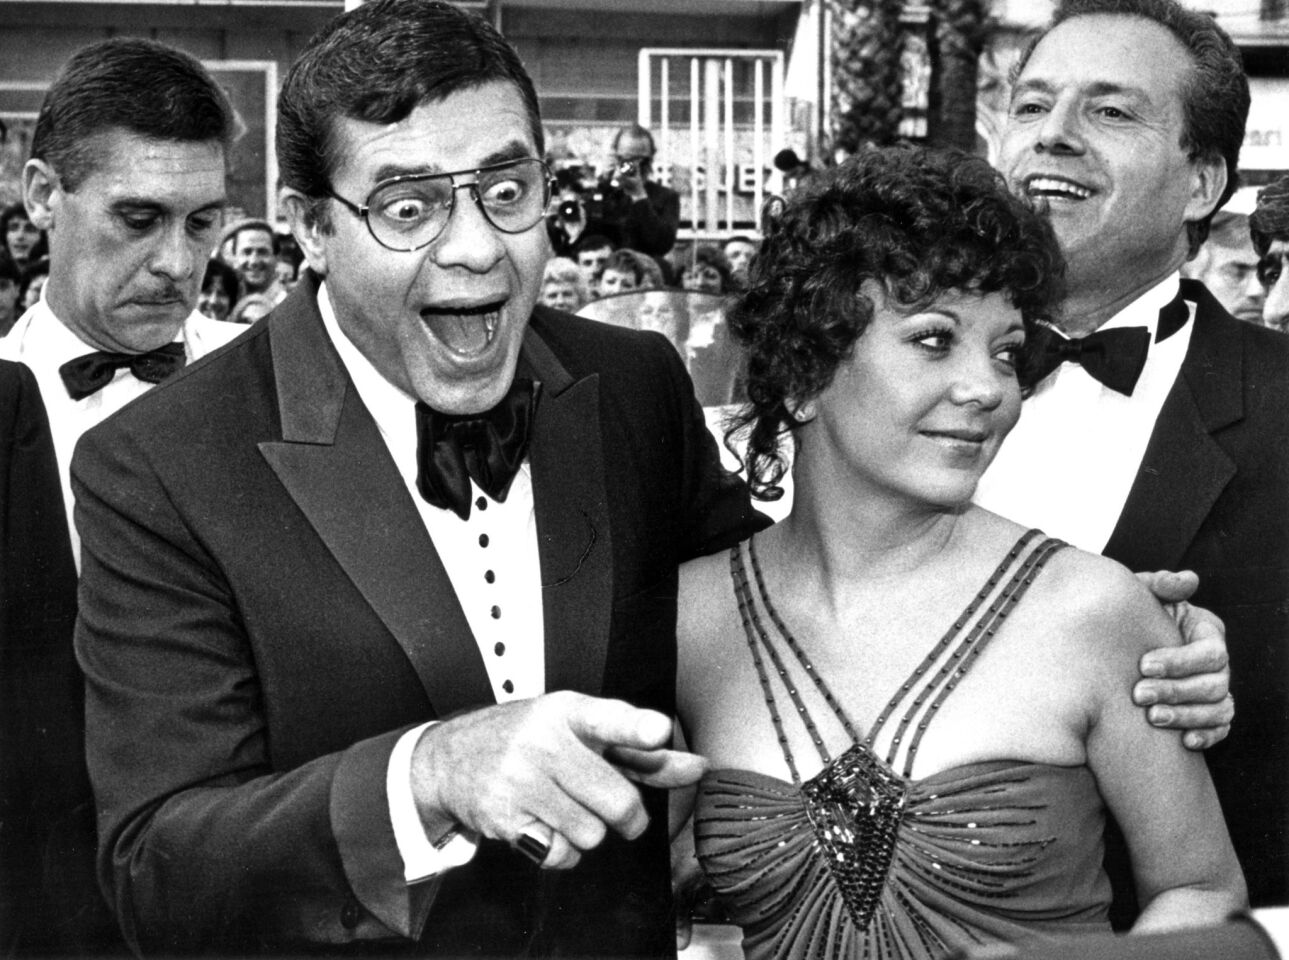 Jerry Lewis and his wife, SanDee, at the opening festivities of the Cannes Film Festival in May 1983